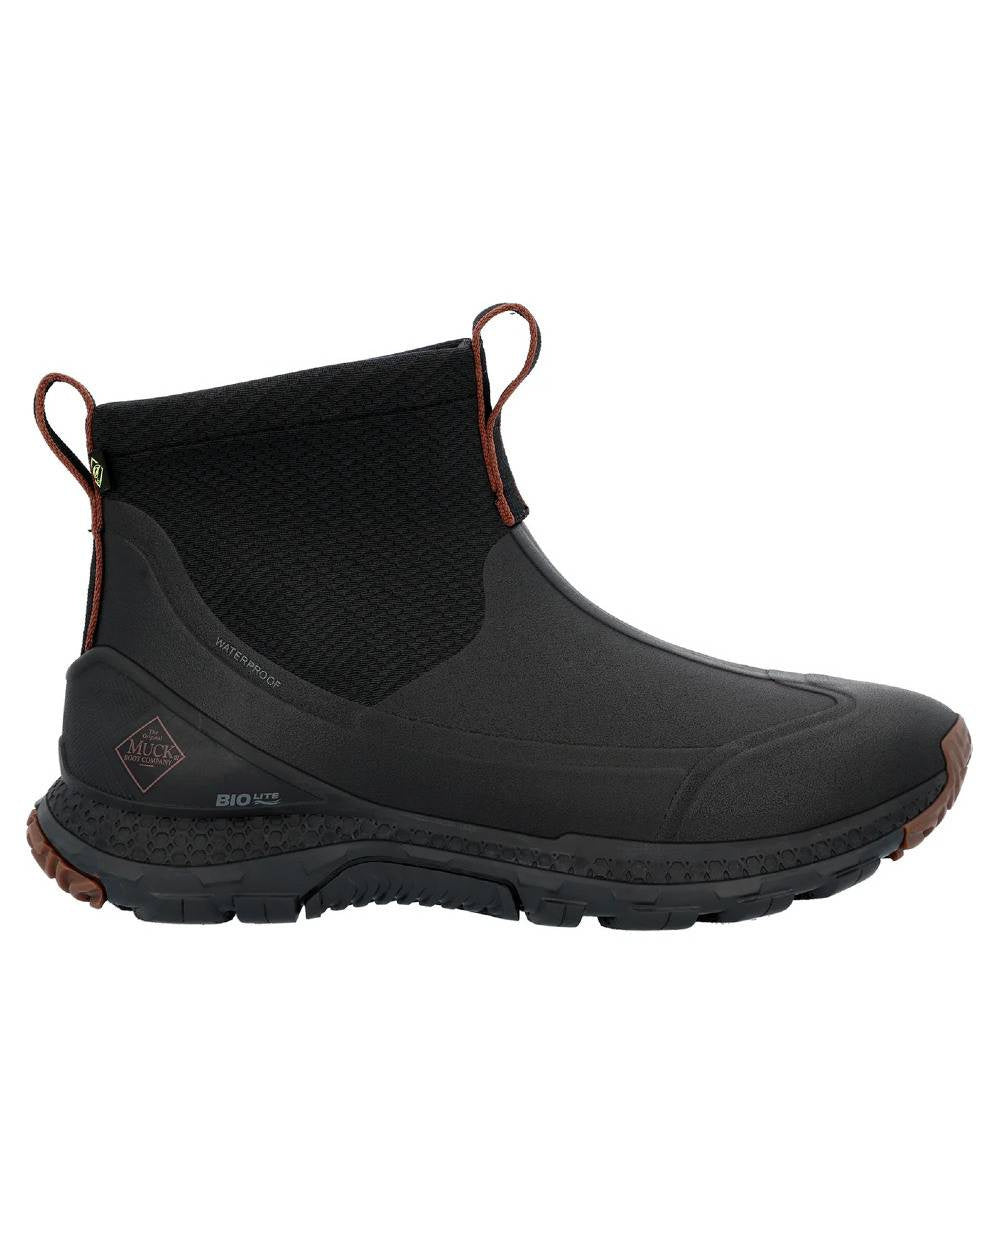 Black Coloured Muck Boots Mens Outscape Max Shoes On A White Background